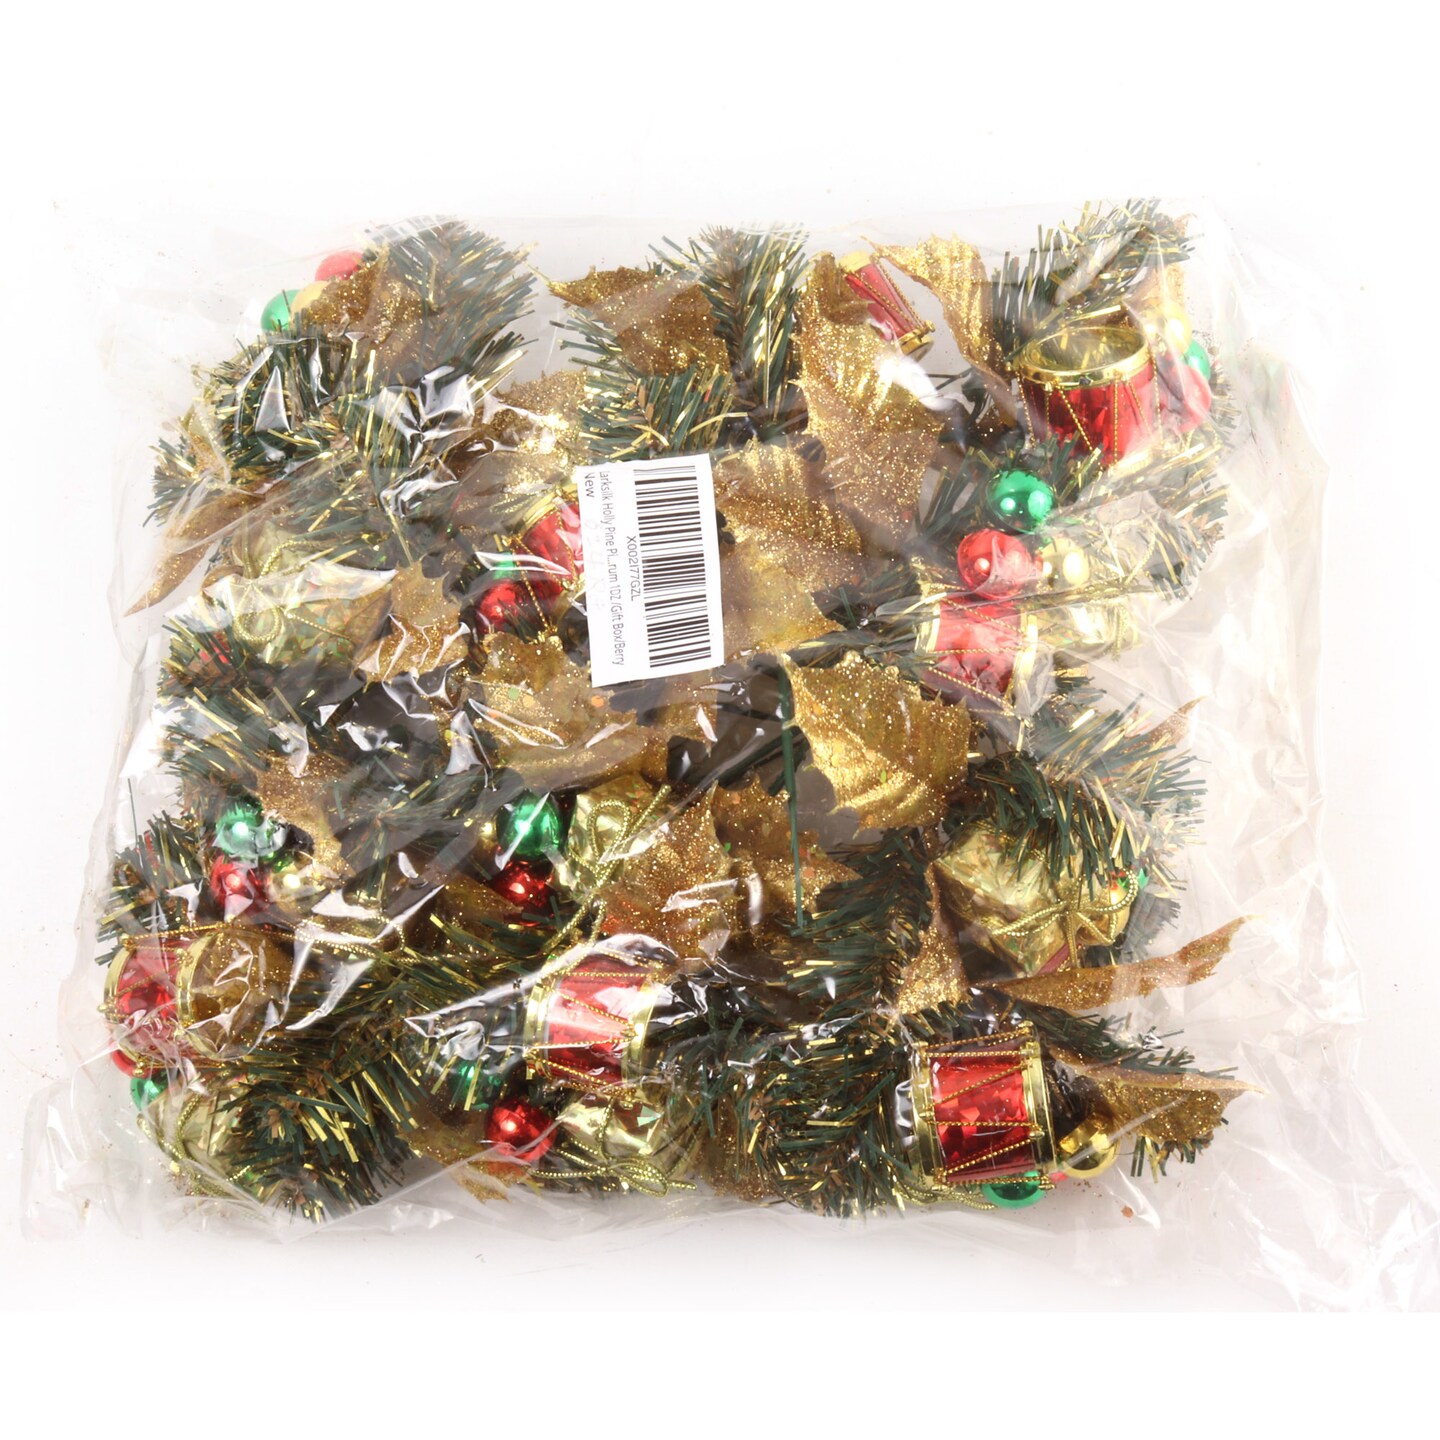 Set of 12: Holly Pine Picks with Gift Box, Ornament Balls, & Drum, Festive  Holiday Decor, Trees, Wreaths, & Garlands, Christmas Picks, Home &  Office Decor